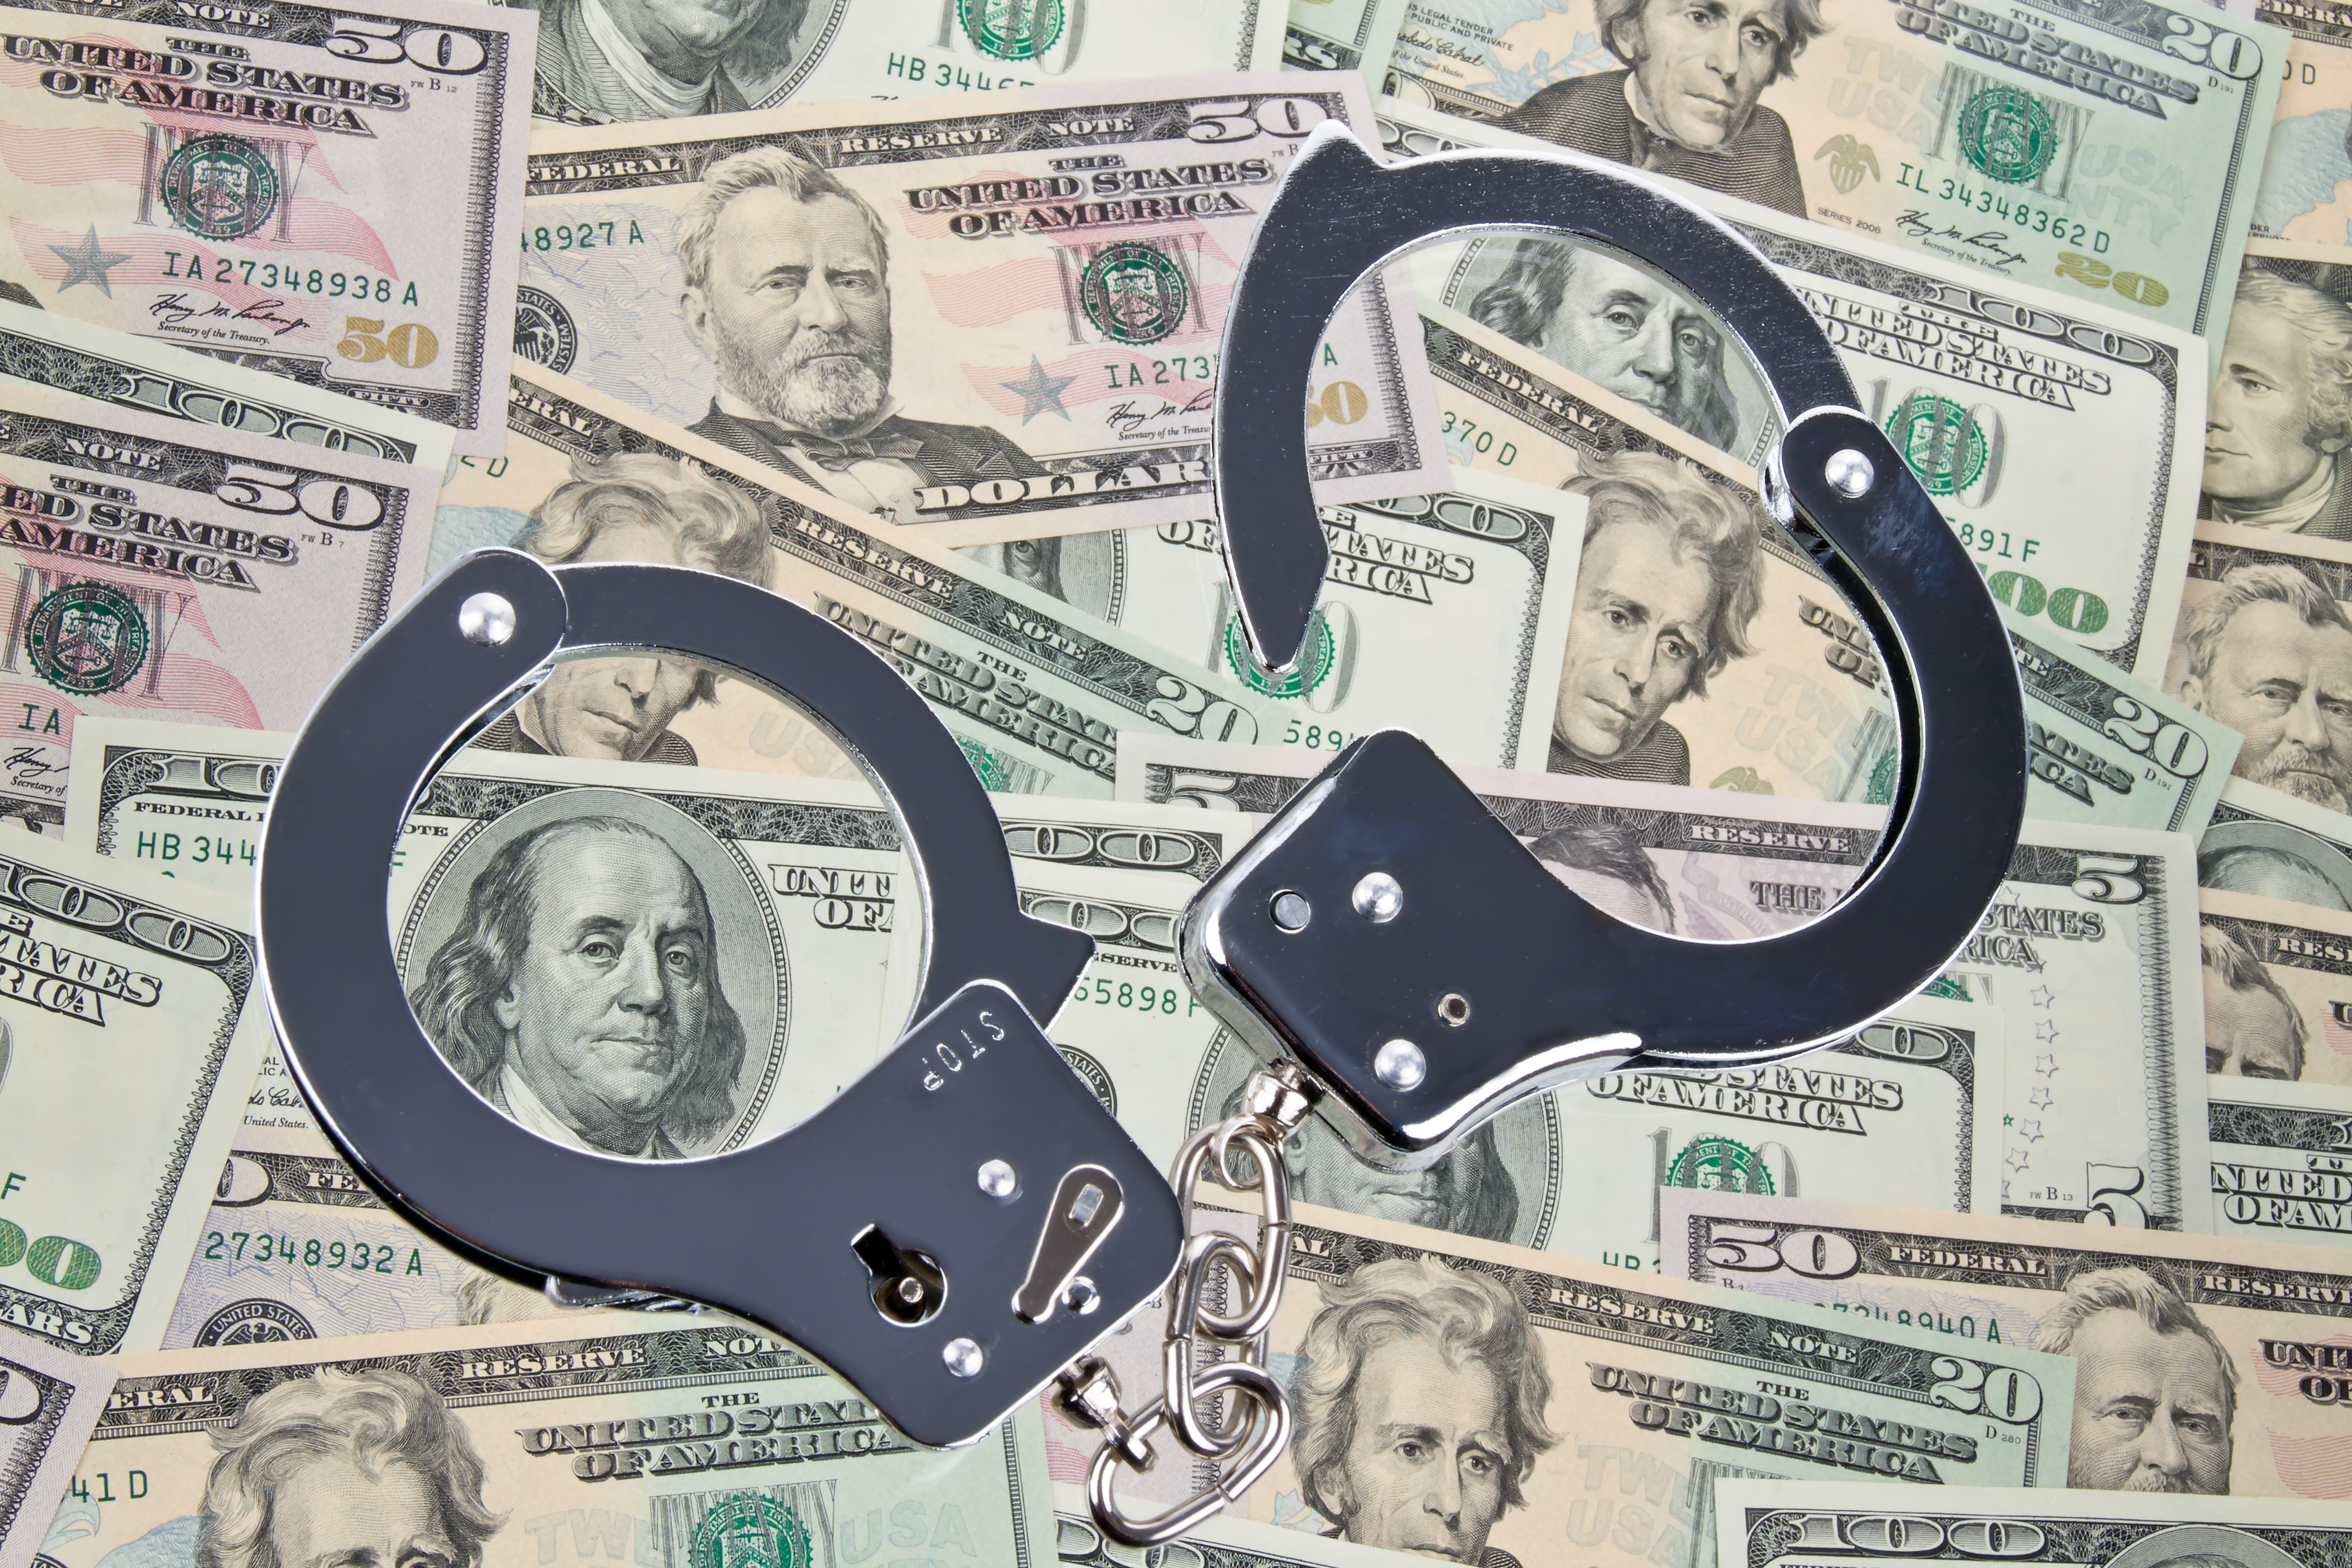 employee-who-stole-usd2-8m-from-company-to-buy-crypto-gets-5-year-jail-term